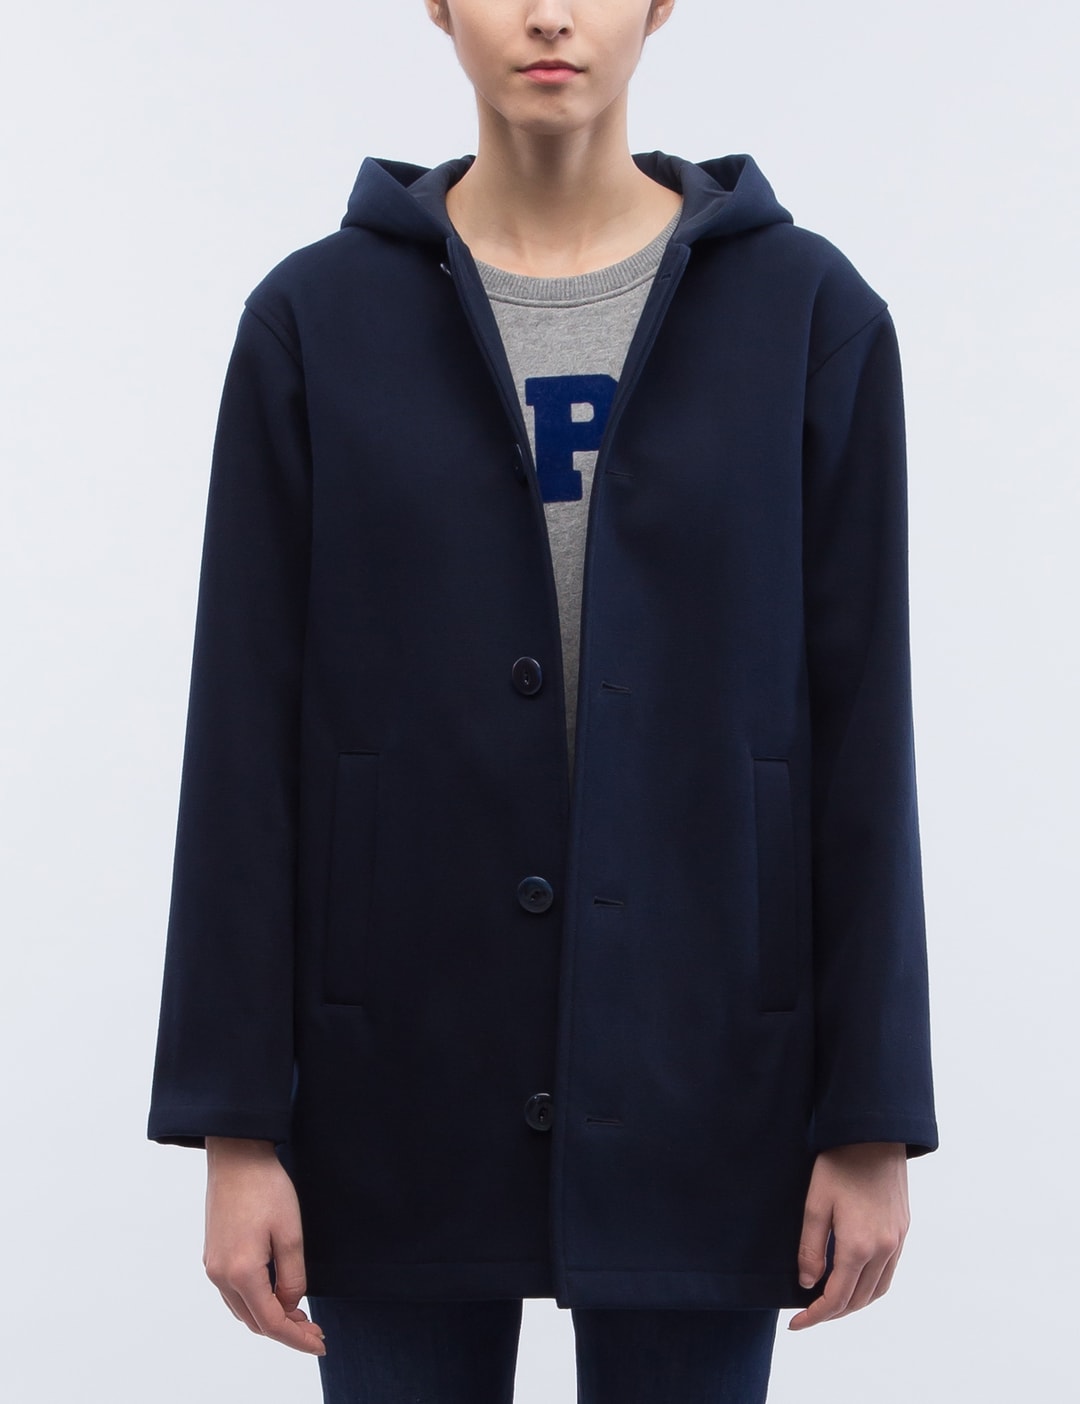 A.P.C. - Anouk Coat | HBX - Globally Curated Fashion and Lifestyle by ...